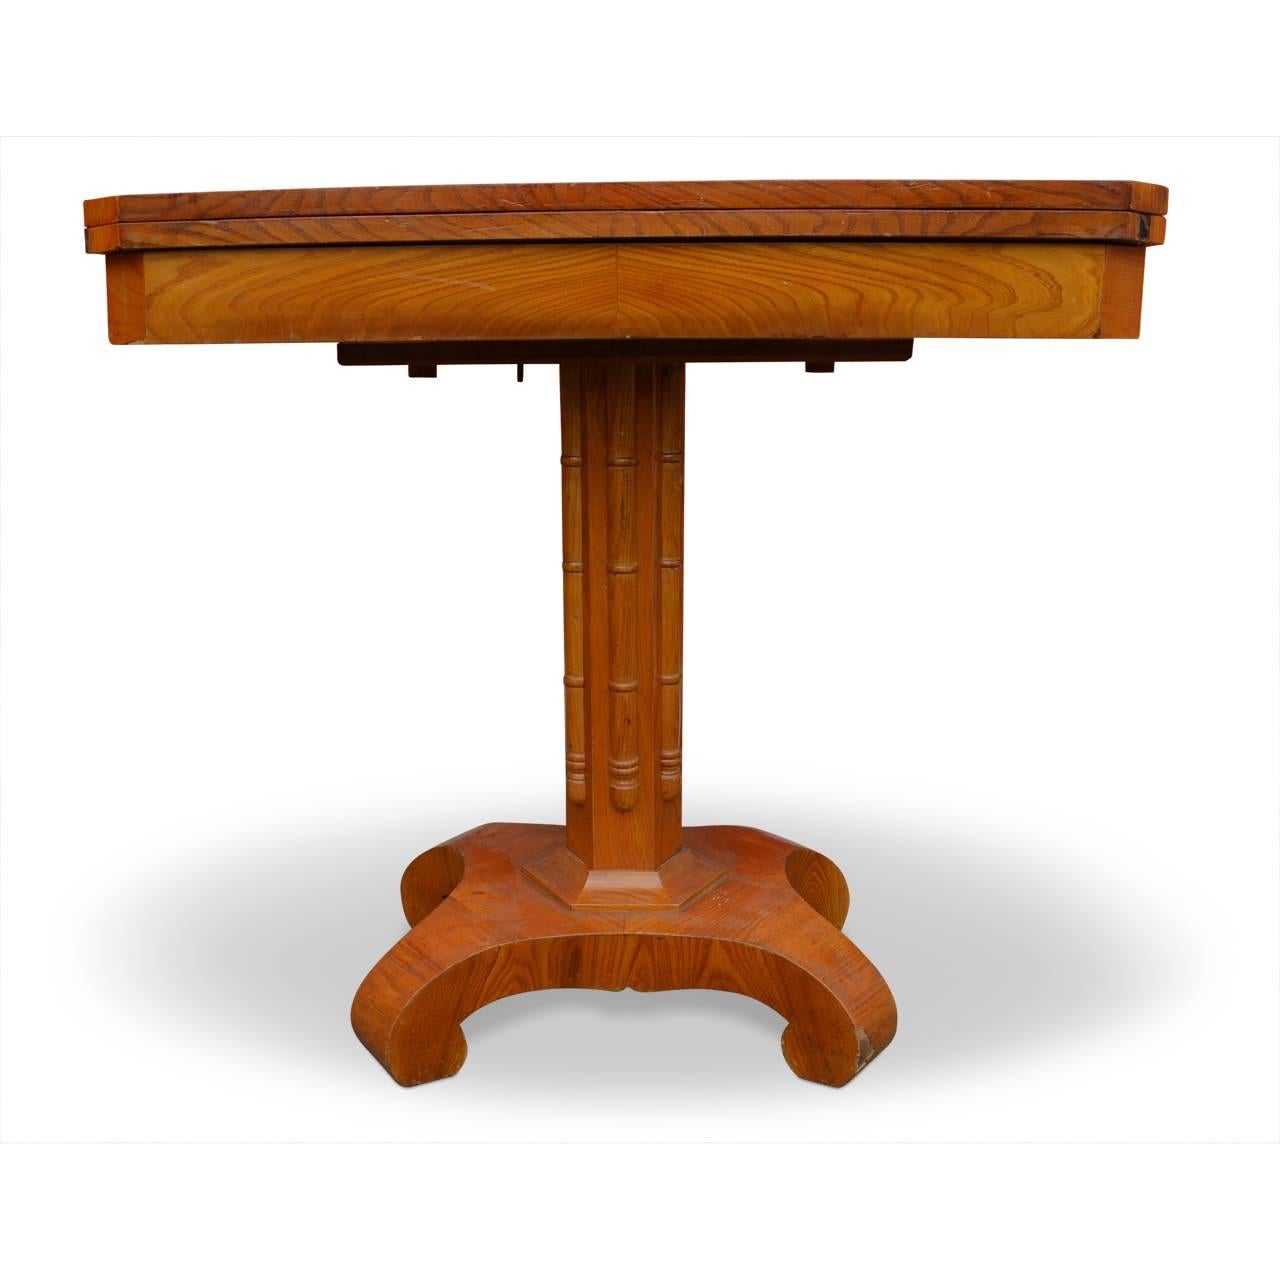 19th century birchwood flip-top table. Top turns and flips open, see attached images.